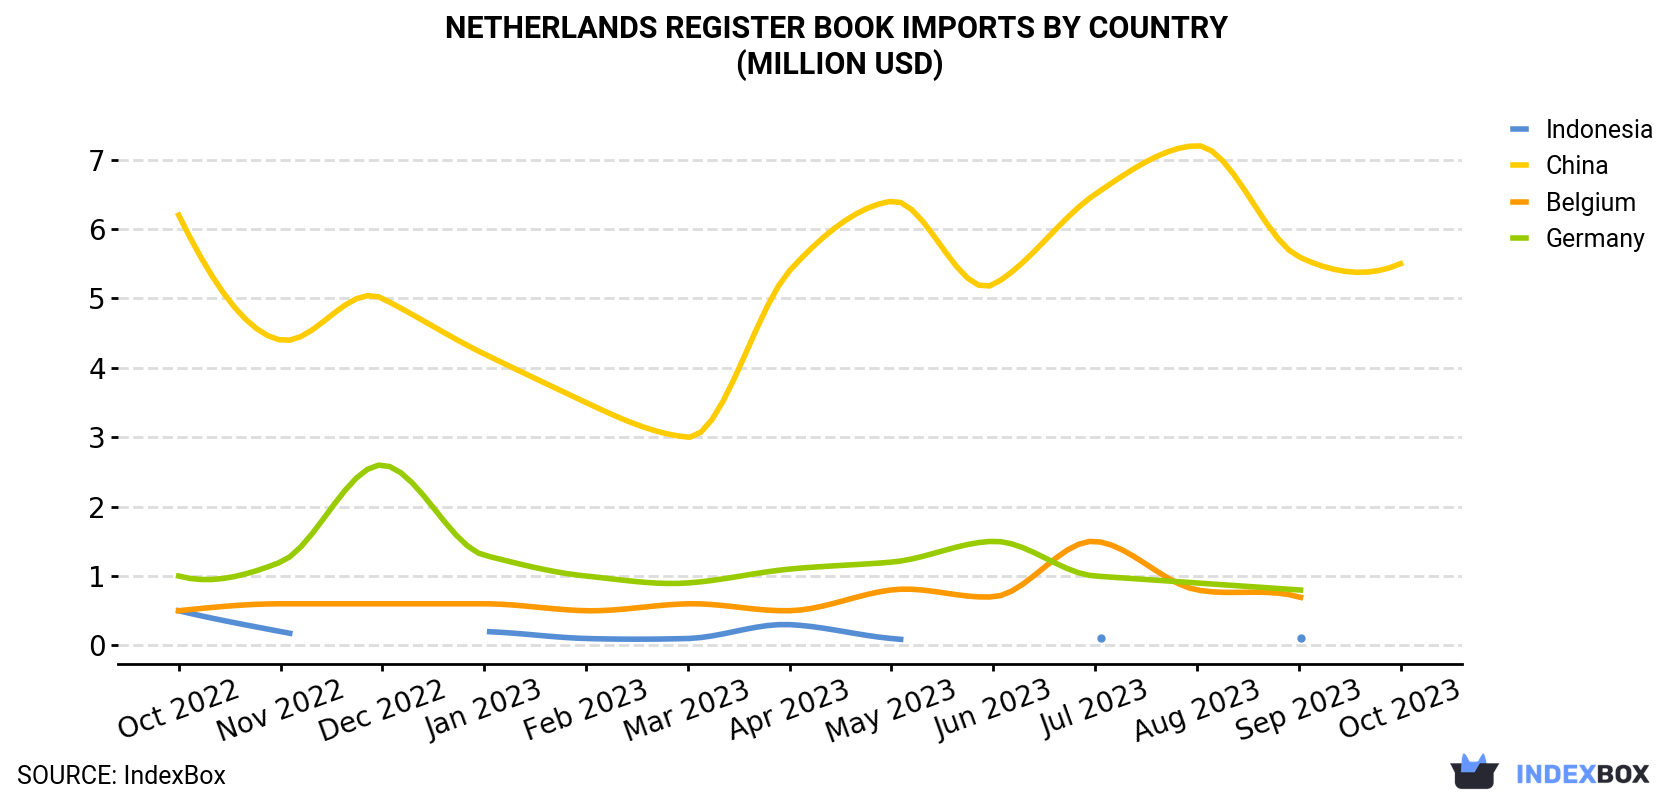 Netherlands Register Book Imports By Country (Million USD)